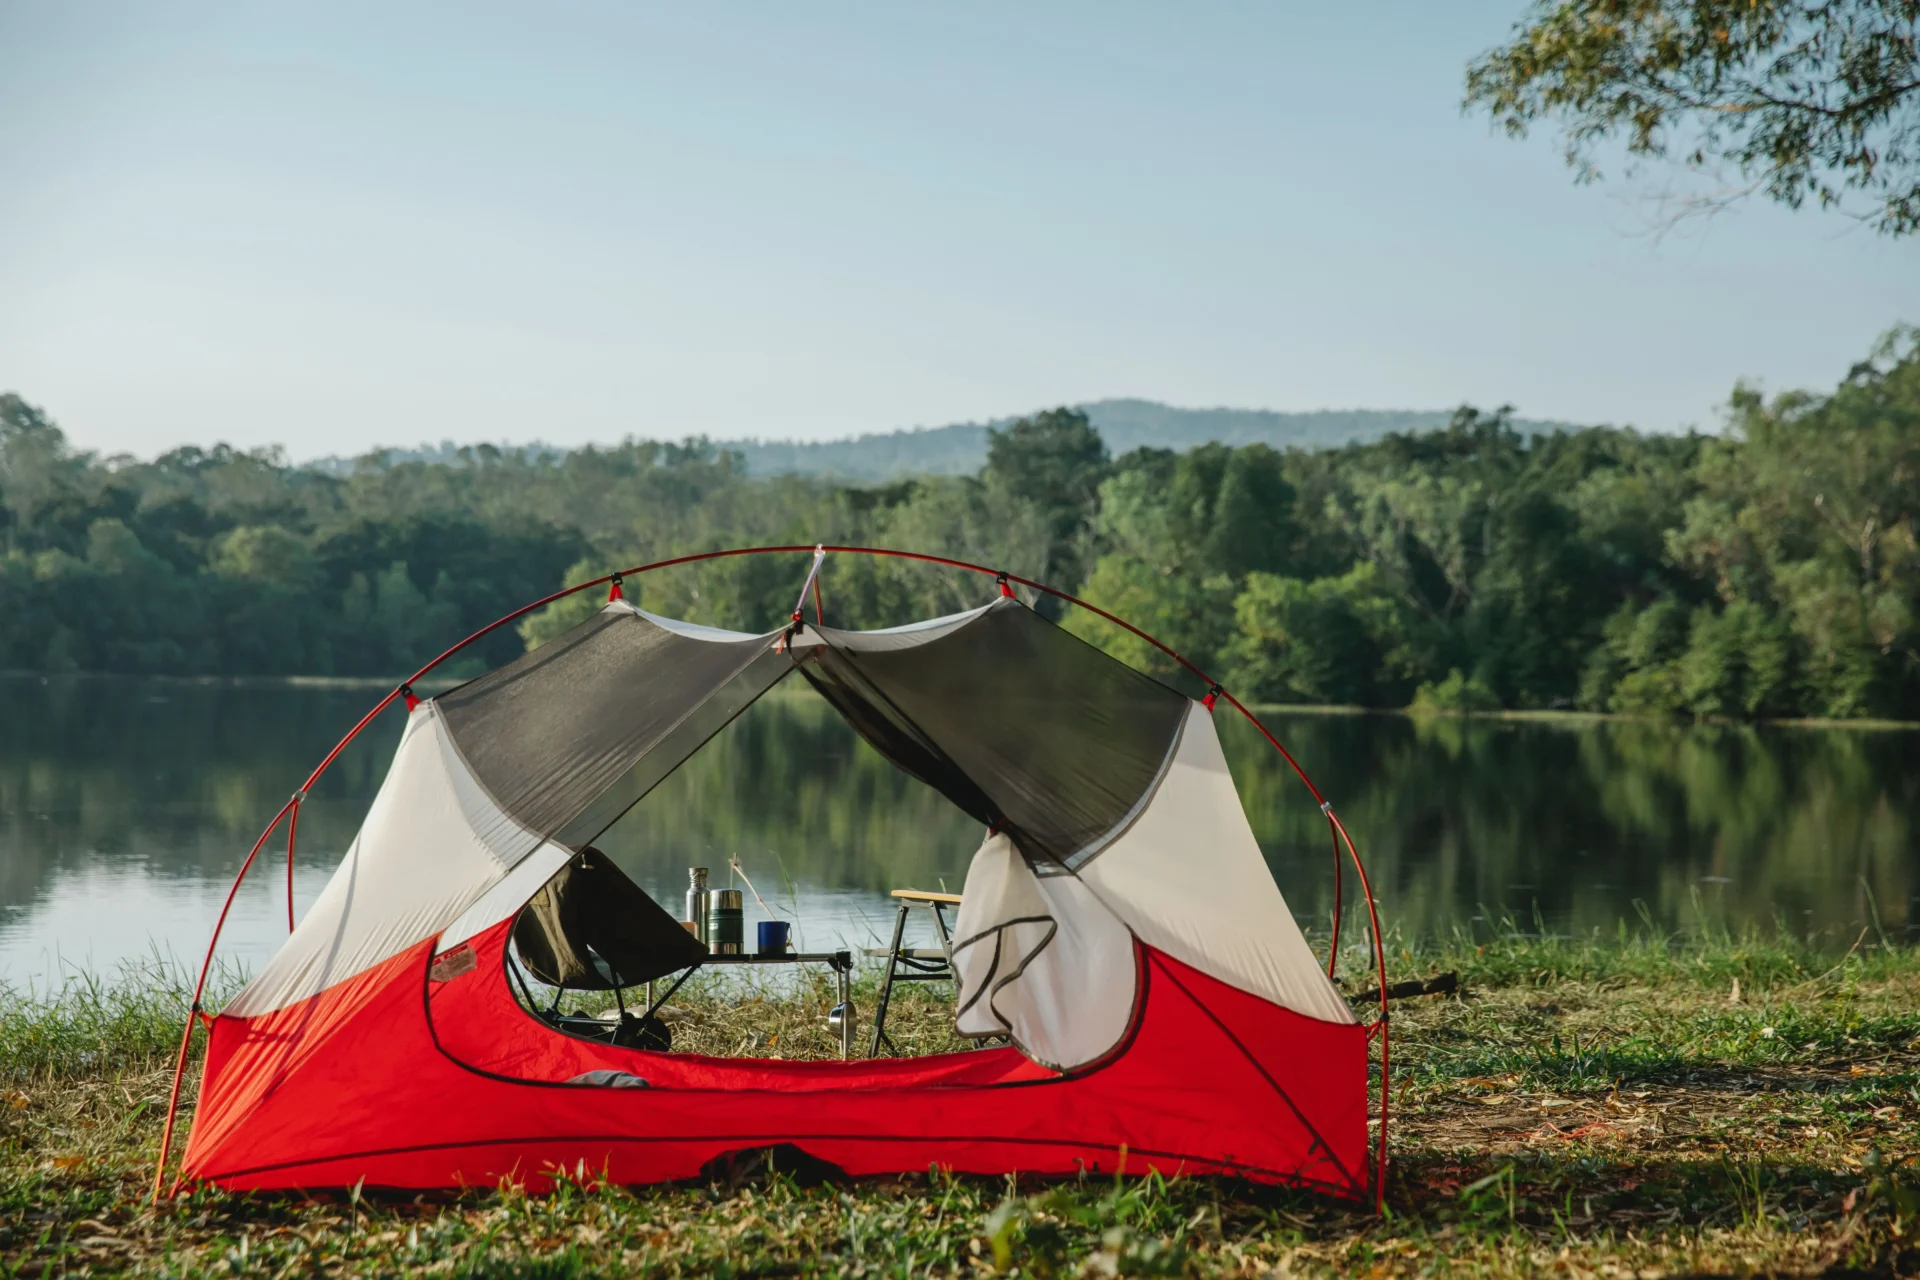 How to Keep A Camping Tent Cool - Fans, Flys and Air Conditioners - Life  inTents